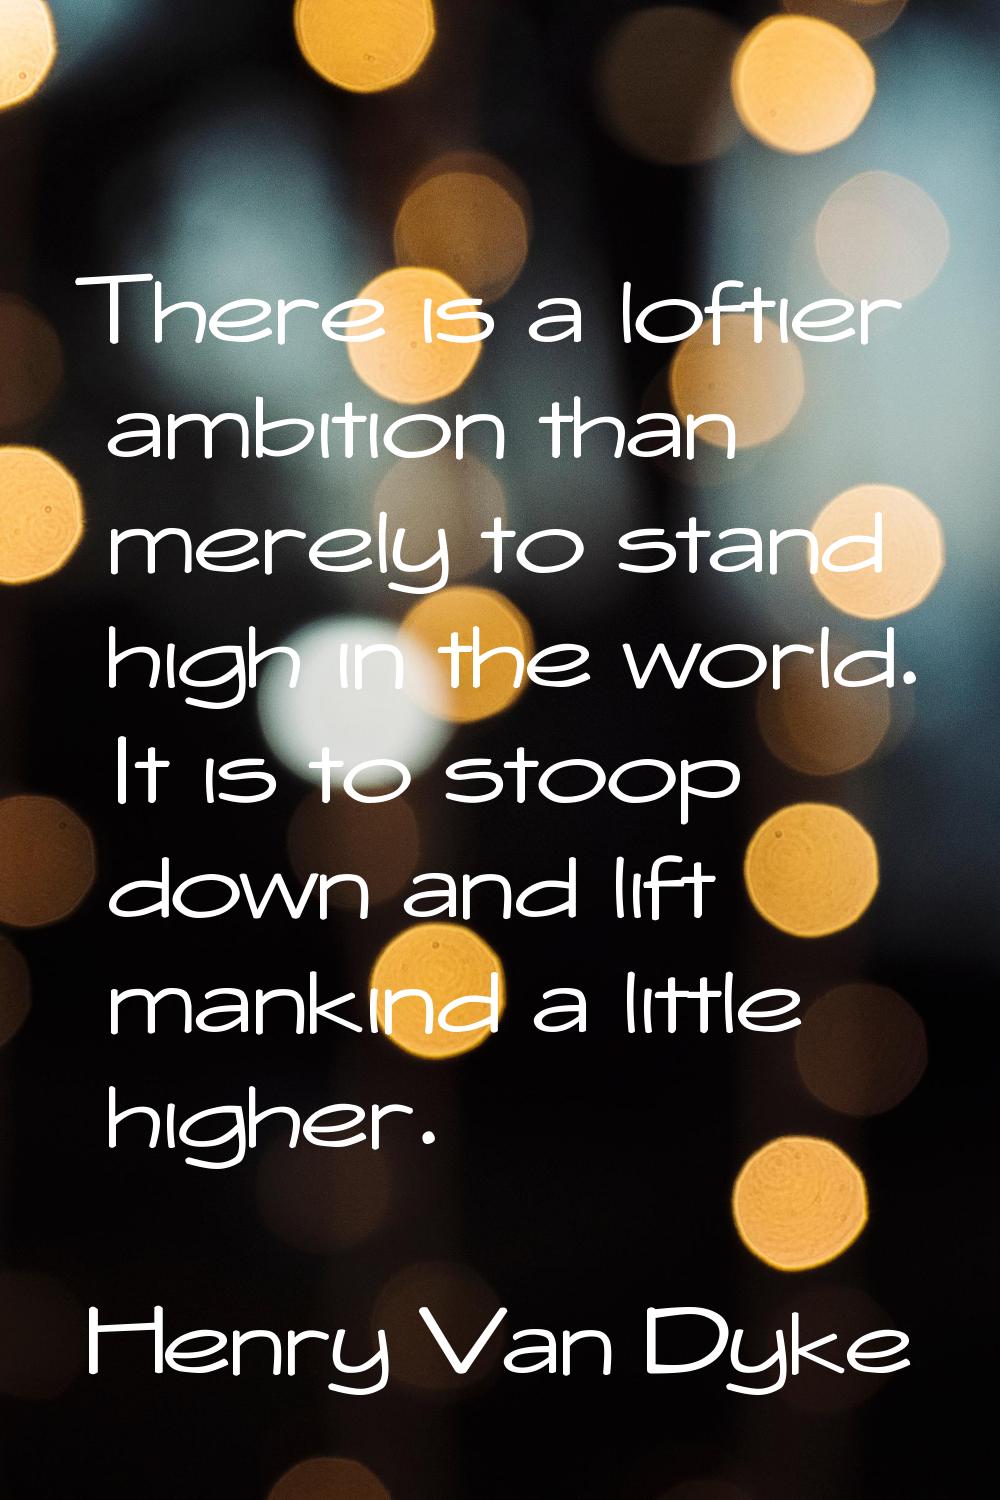 There is a loftier ambition than merely to stand high in the world. It is to stoop down and lift ma